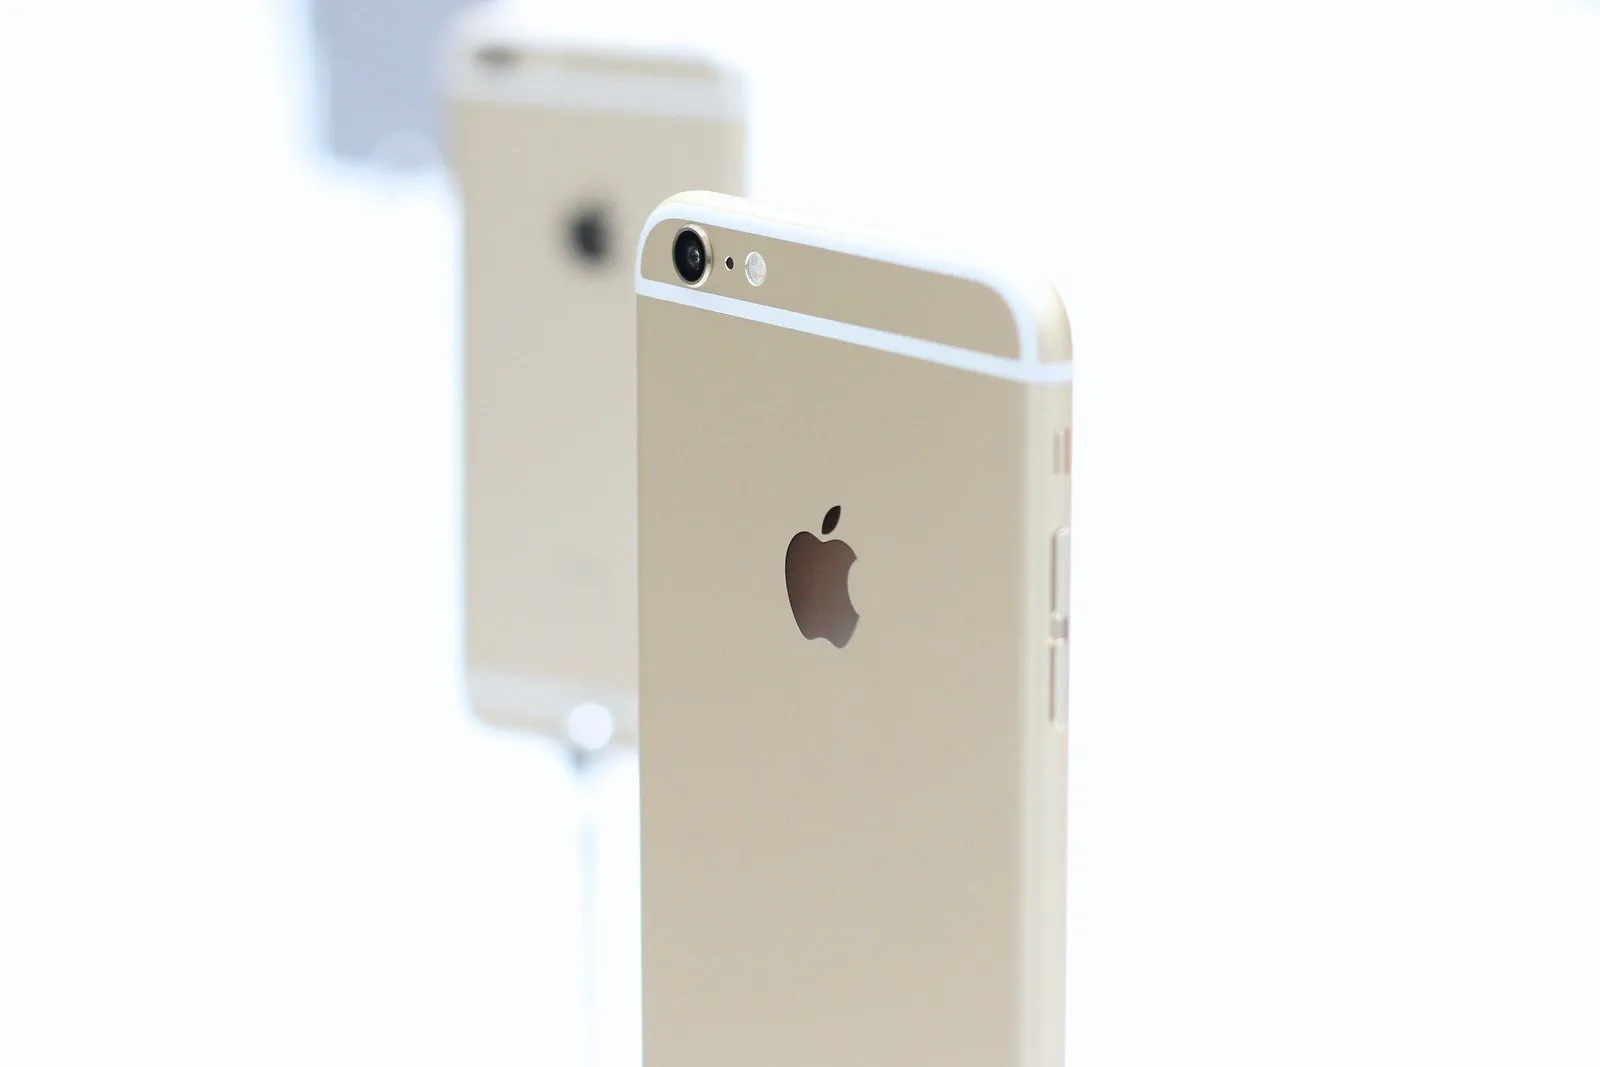 iPhone 6 is now considered a 'Vintage' product by Apple